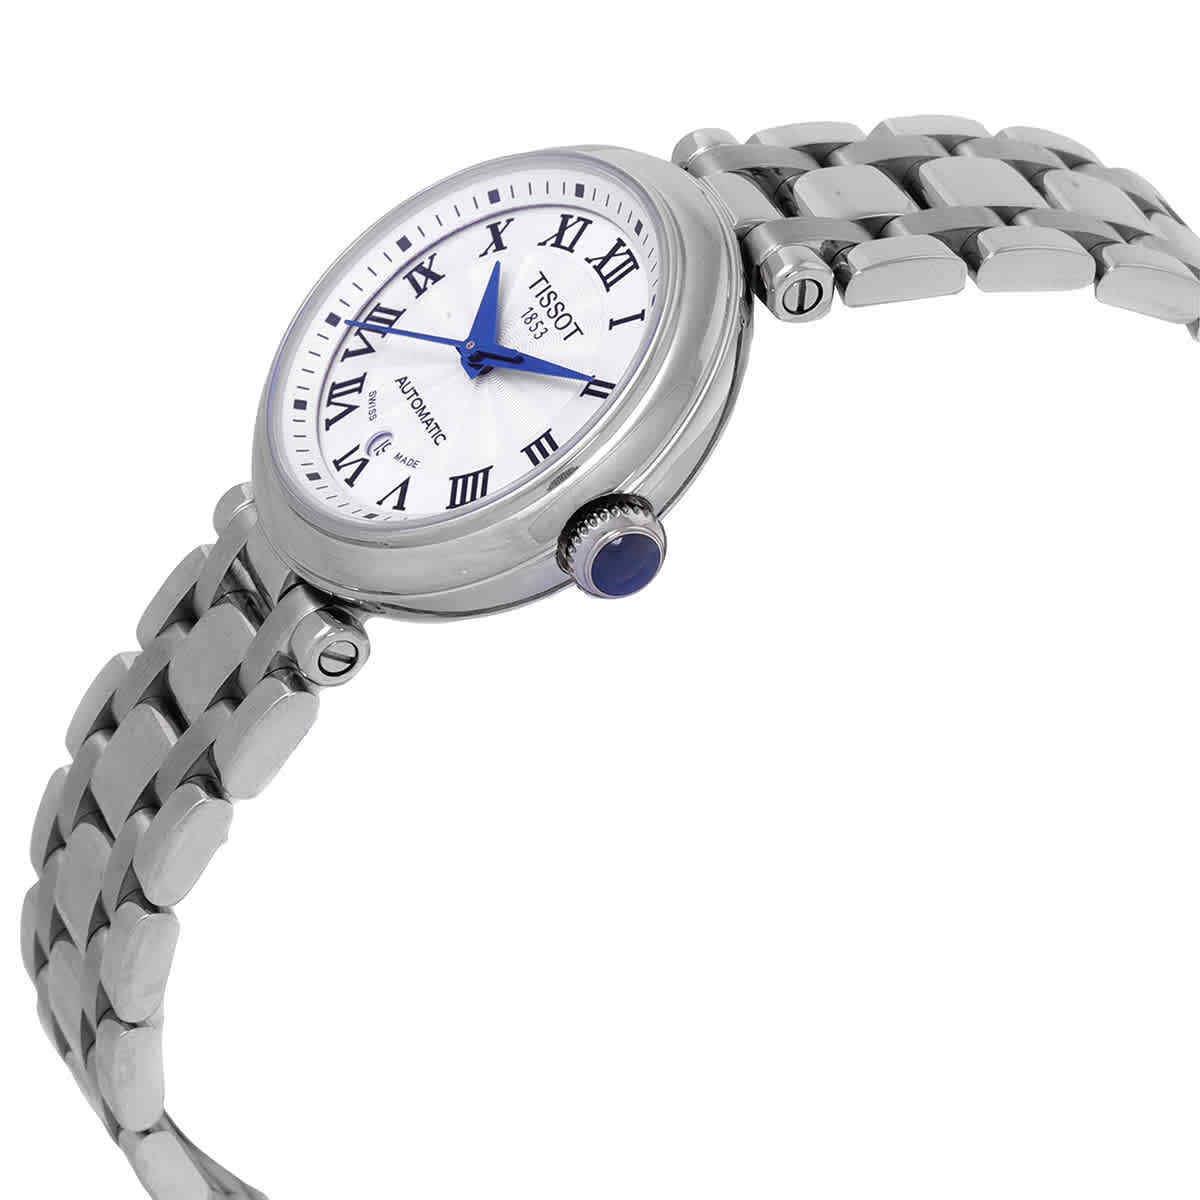 Tissot Bellissima Automatic White Dial Ladies Watch T1262071101300 - Dial: Silver, Band: Silver, Bezel: Silver